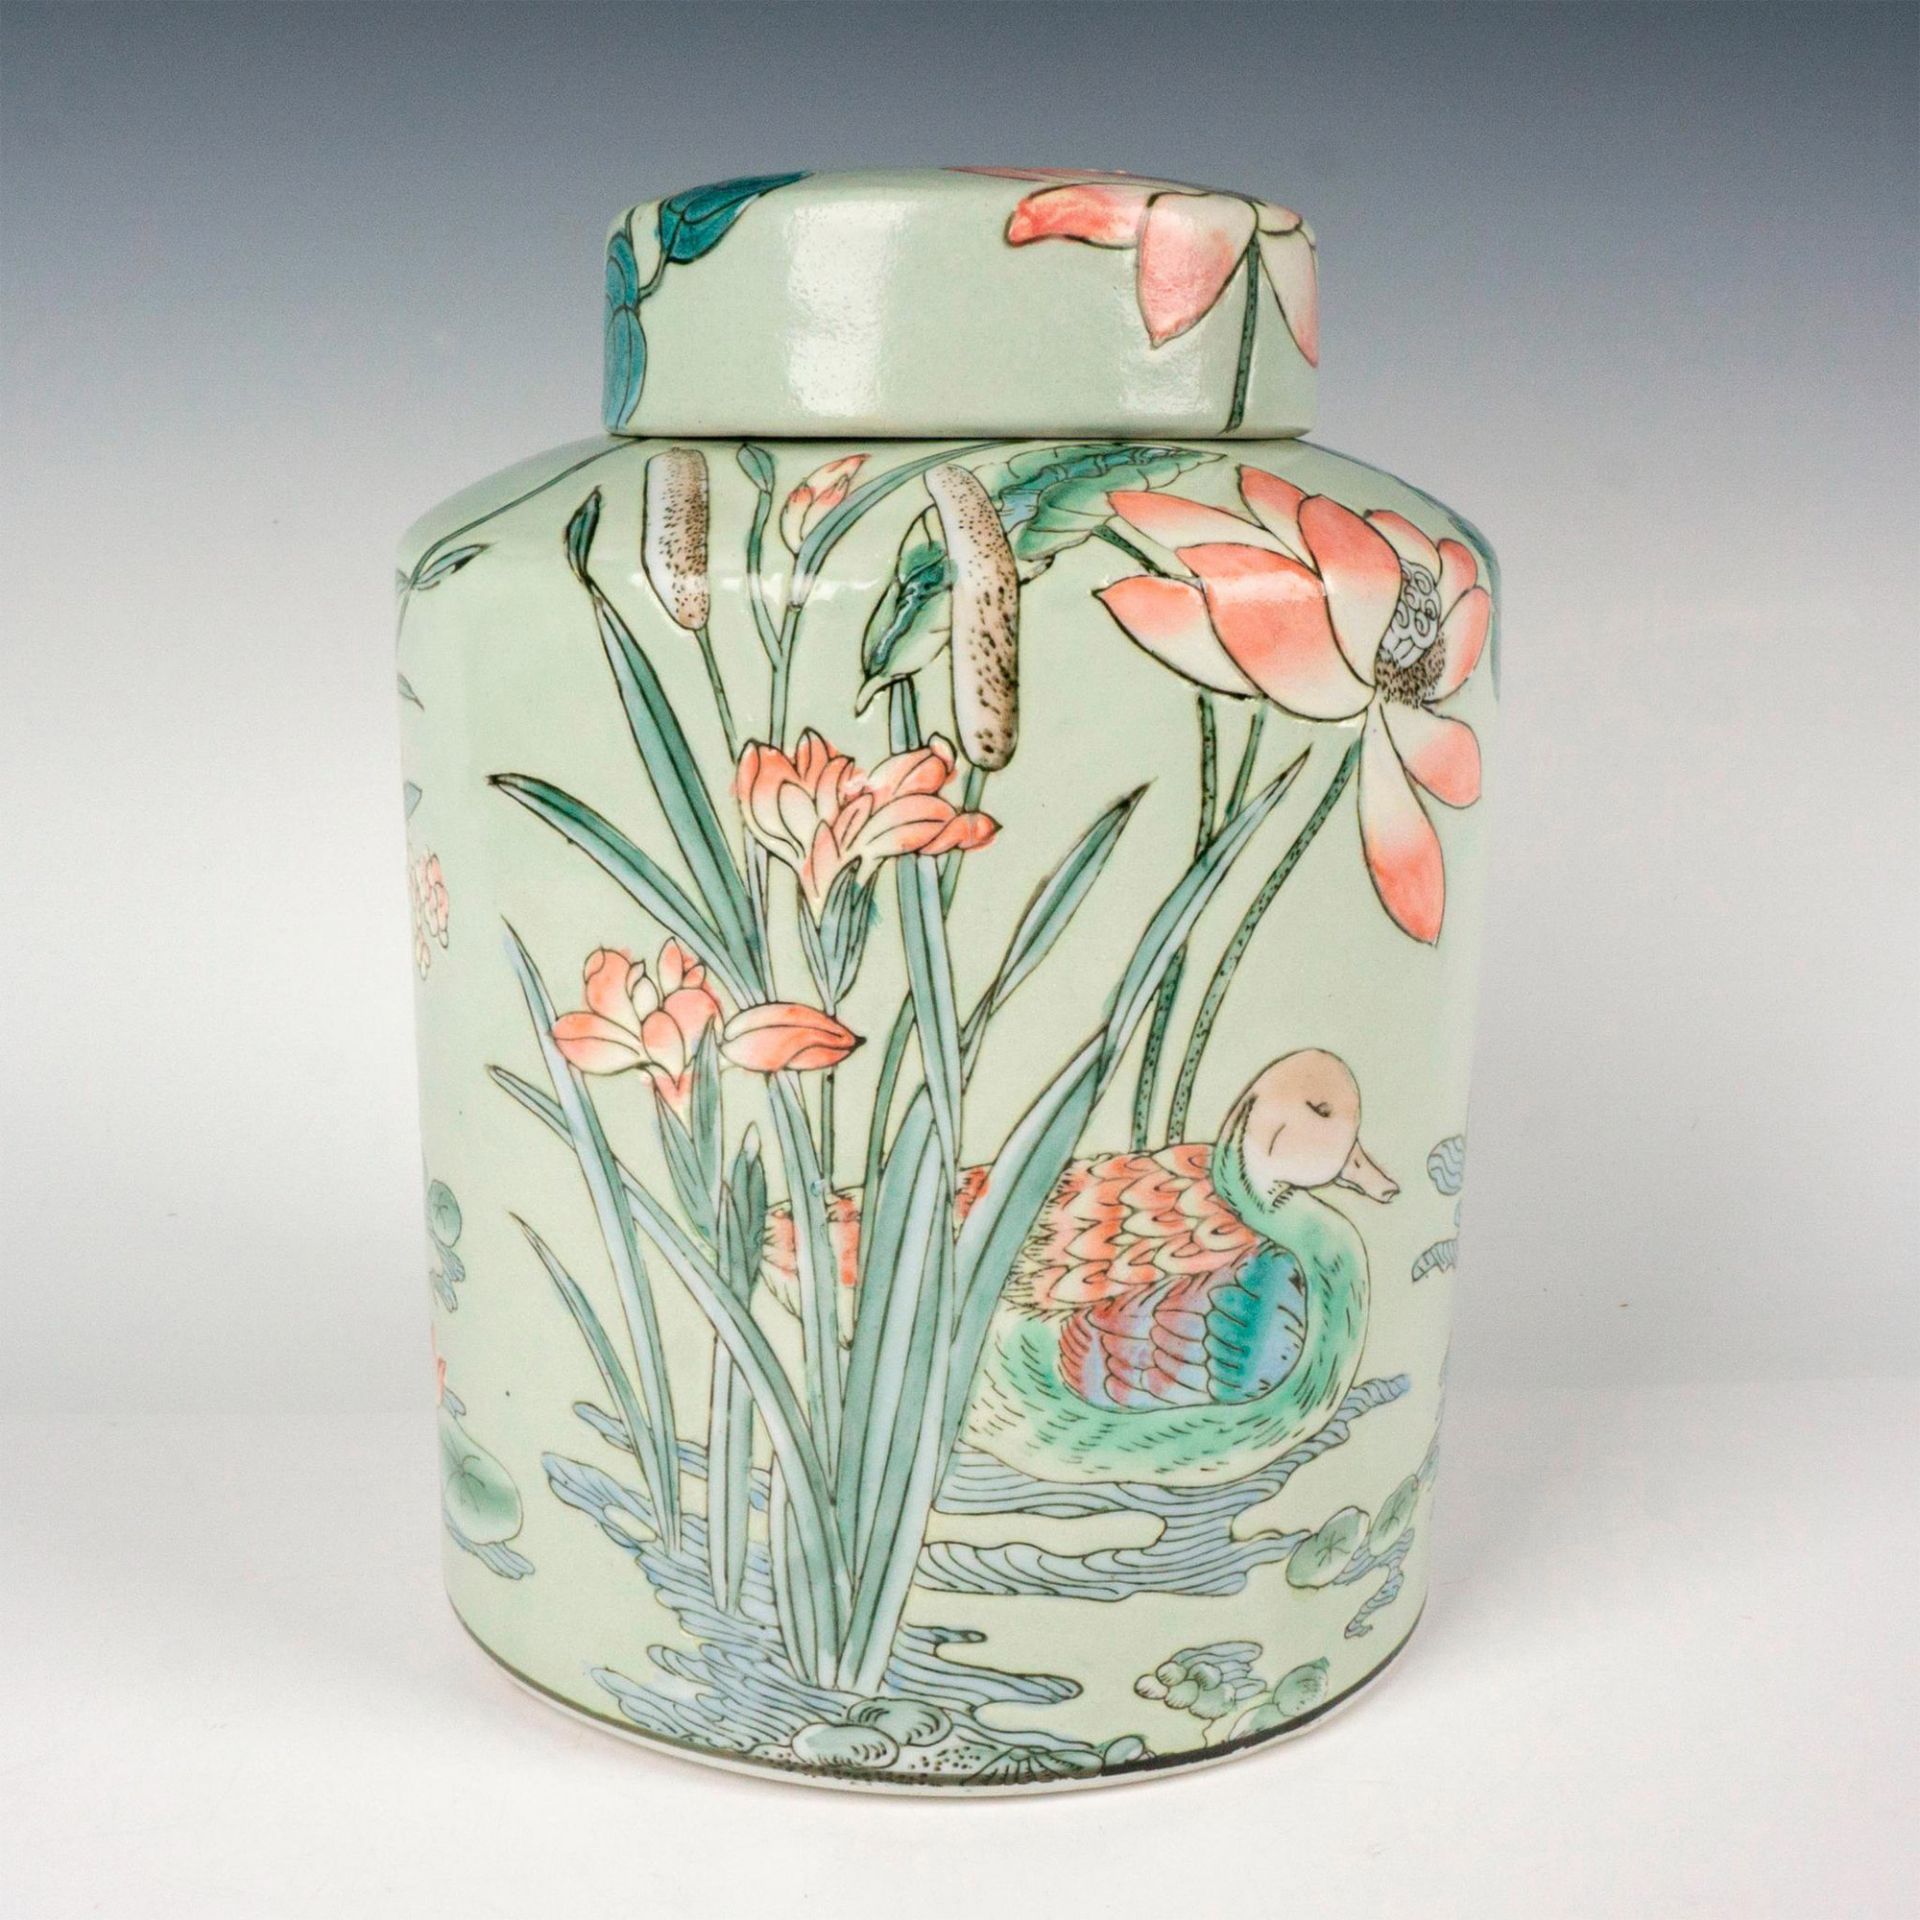 Chinese Porcelain Celadon Enamel Painted Duck Jar with Lid - Image 2 of 3